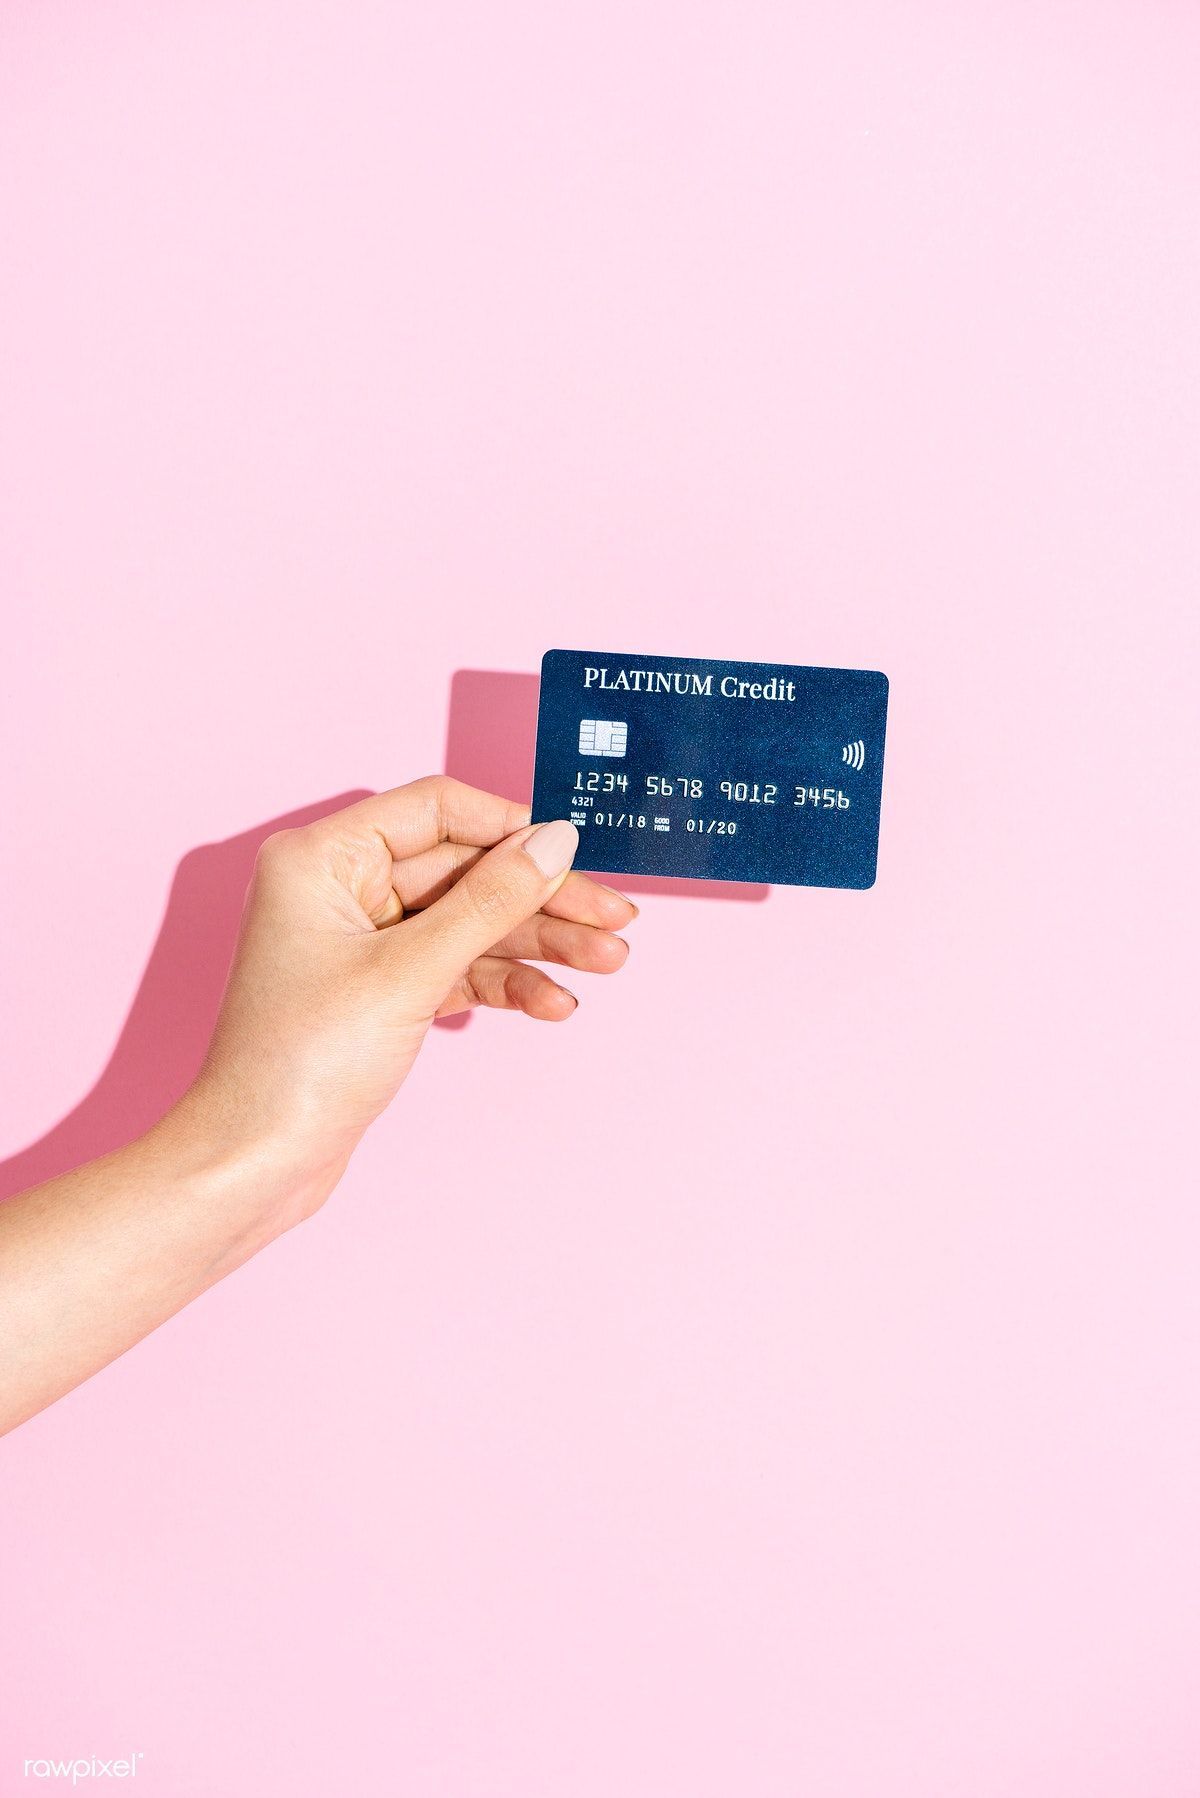  Visa Hintergrundbild 1200x1798. Download free image of Woman holding a credit card against a pink background by Teddy about credit card, m. Credit card icon, Credit card image, Pink background